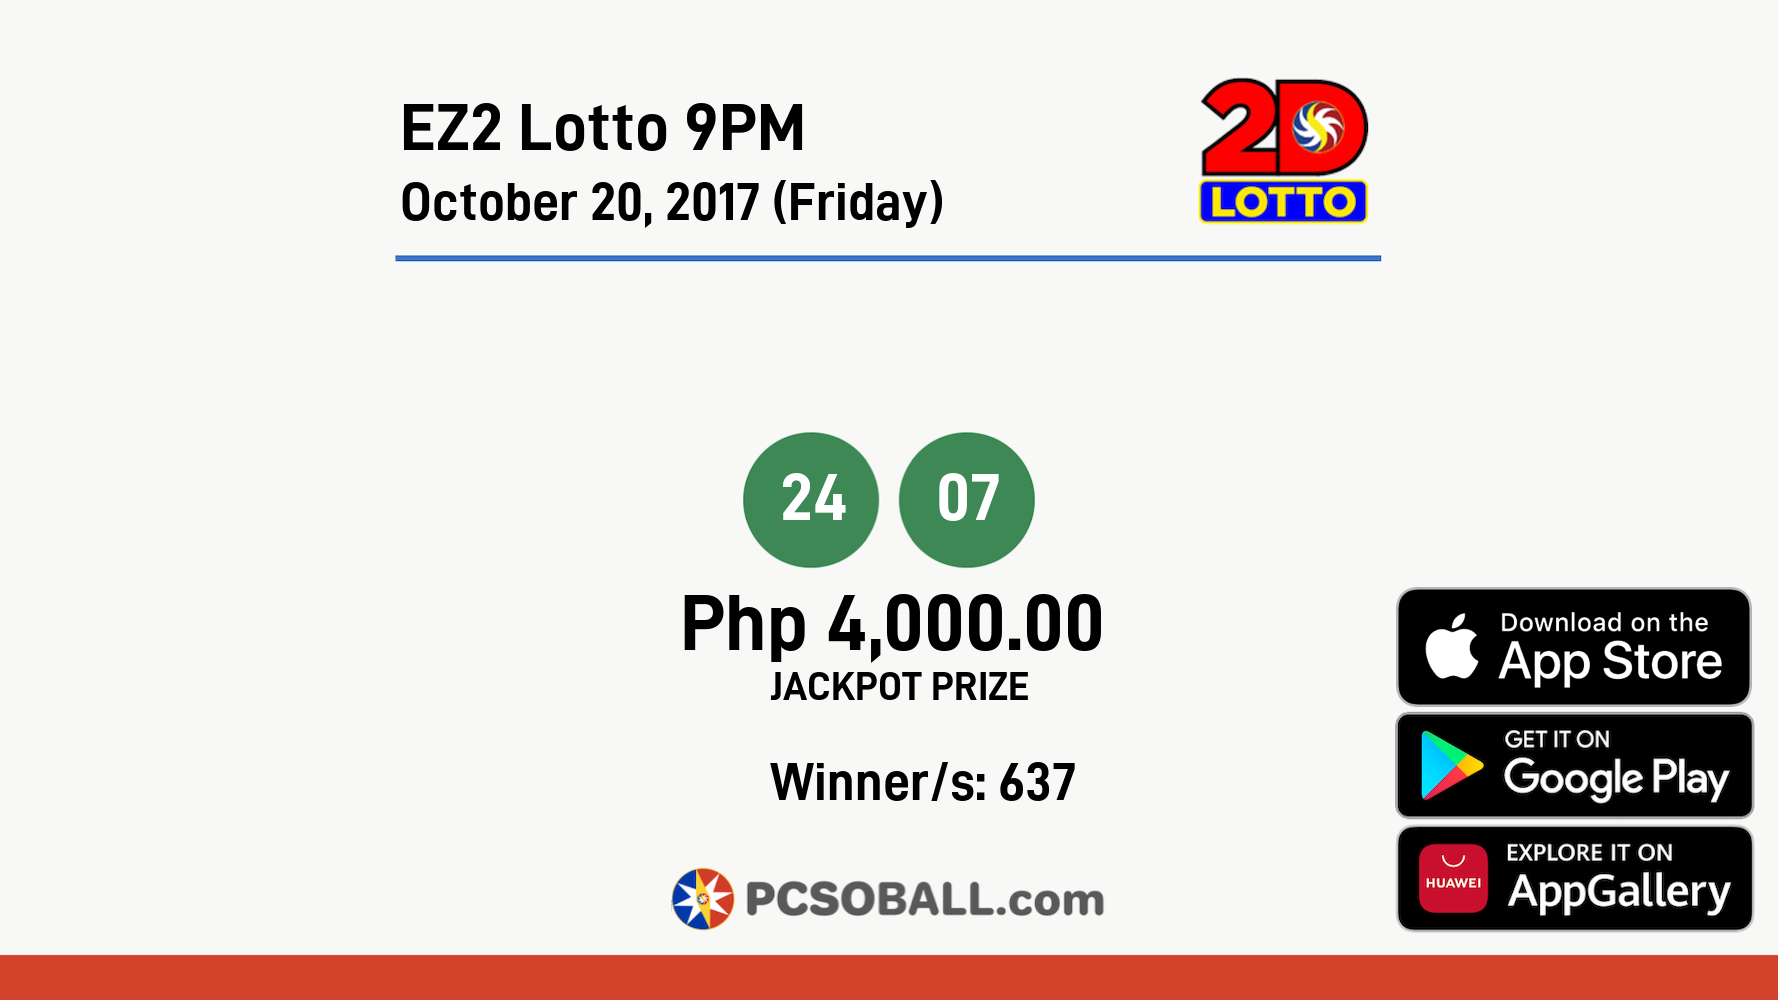 EZ2 Lotto 9PM October 20, 2017 (Friday) Result